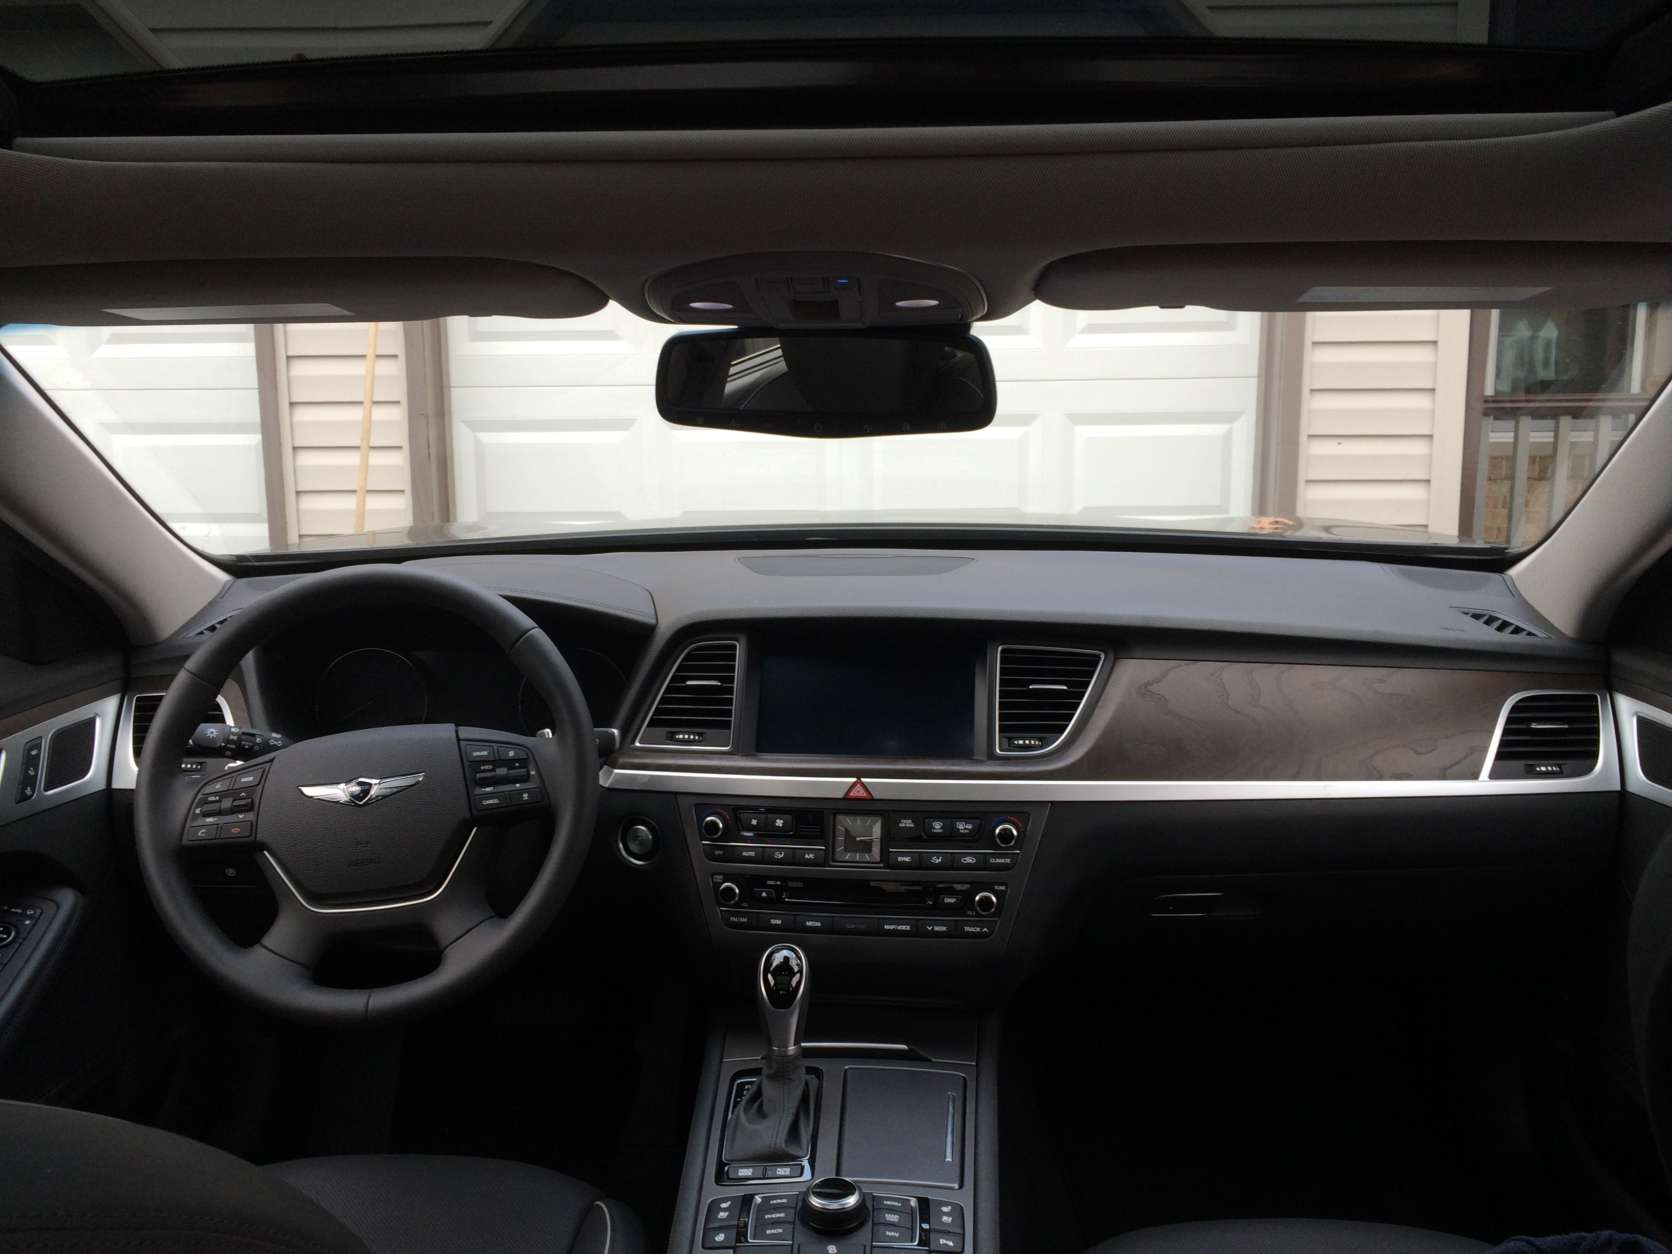 The Genesis G80 has real wood trim and a wealth of soft touch materials in the cabin. (WTOP/Mike Parris)